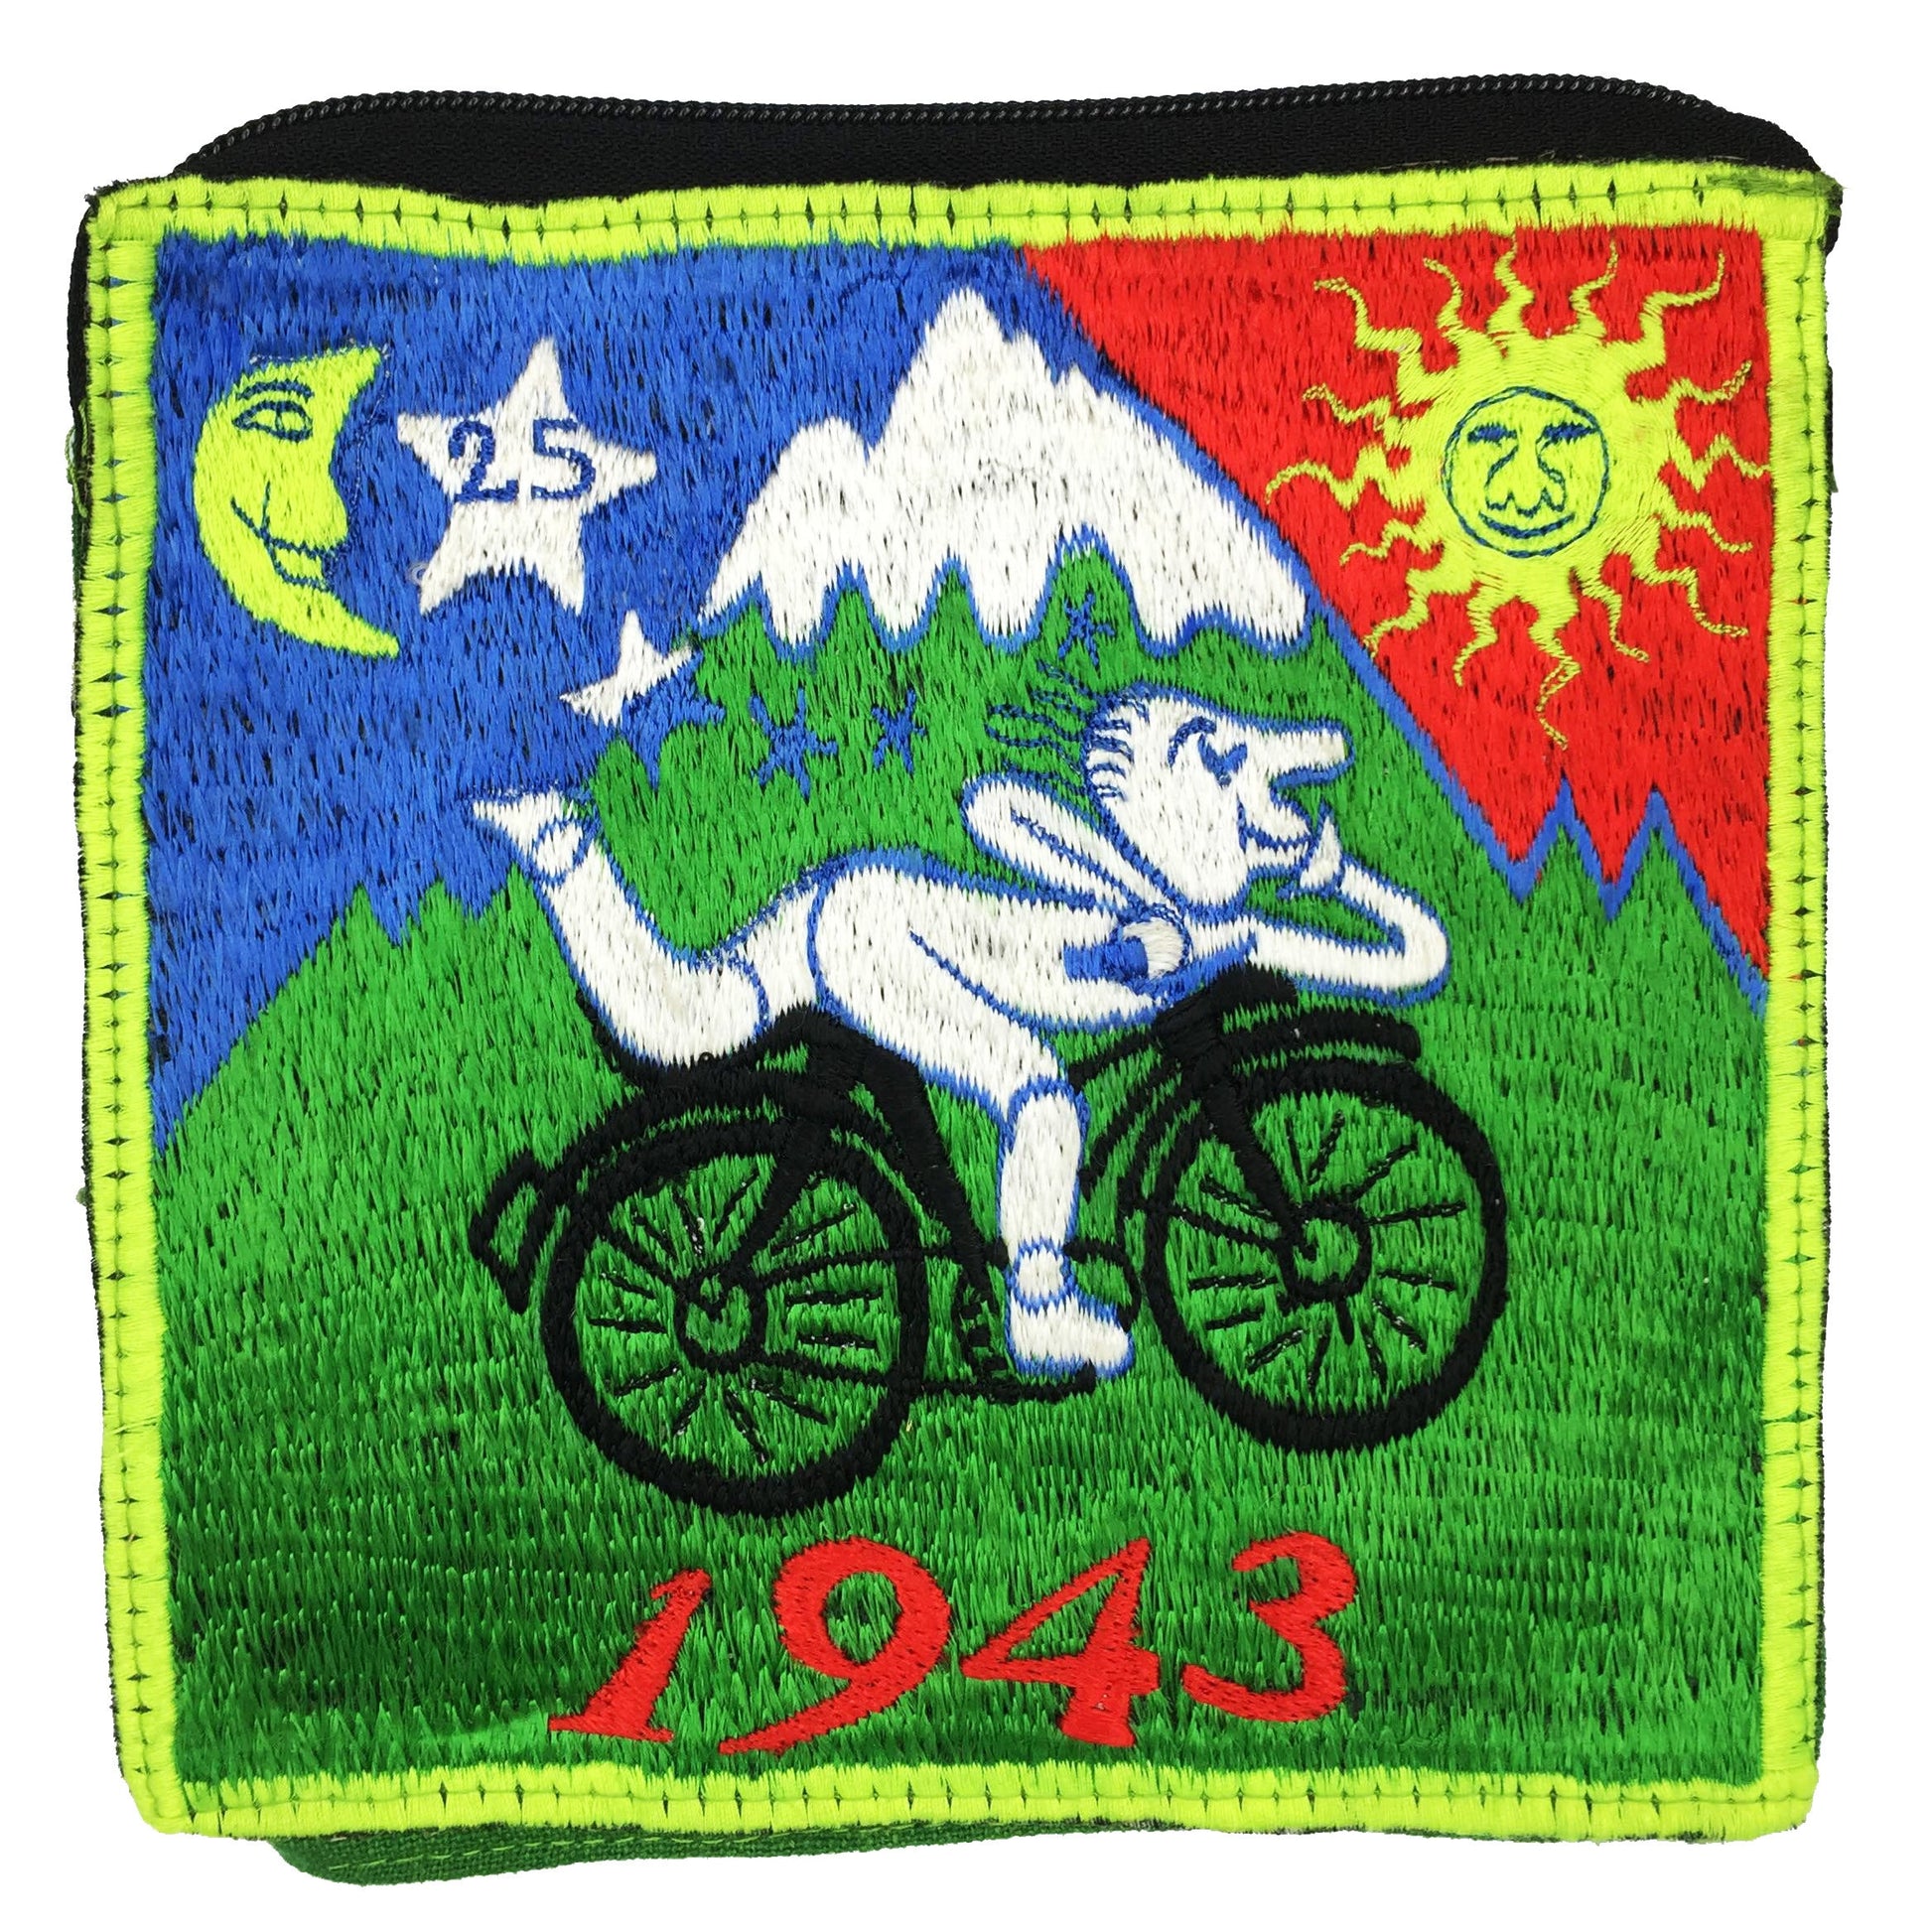 Bicycle Day Bag Albert Hofmann 1943 LSD Patch Psychedelic Hippie Timothy Leary with zip lock storagebag Bicycleday